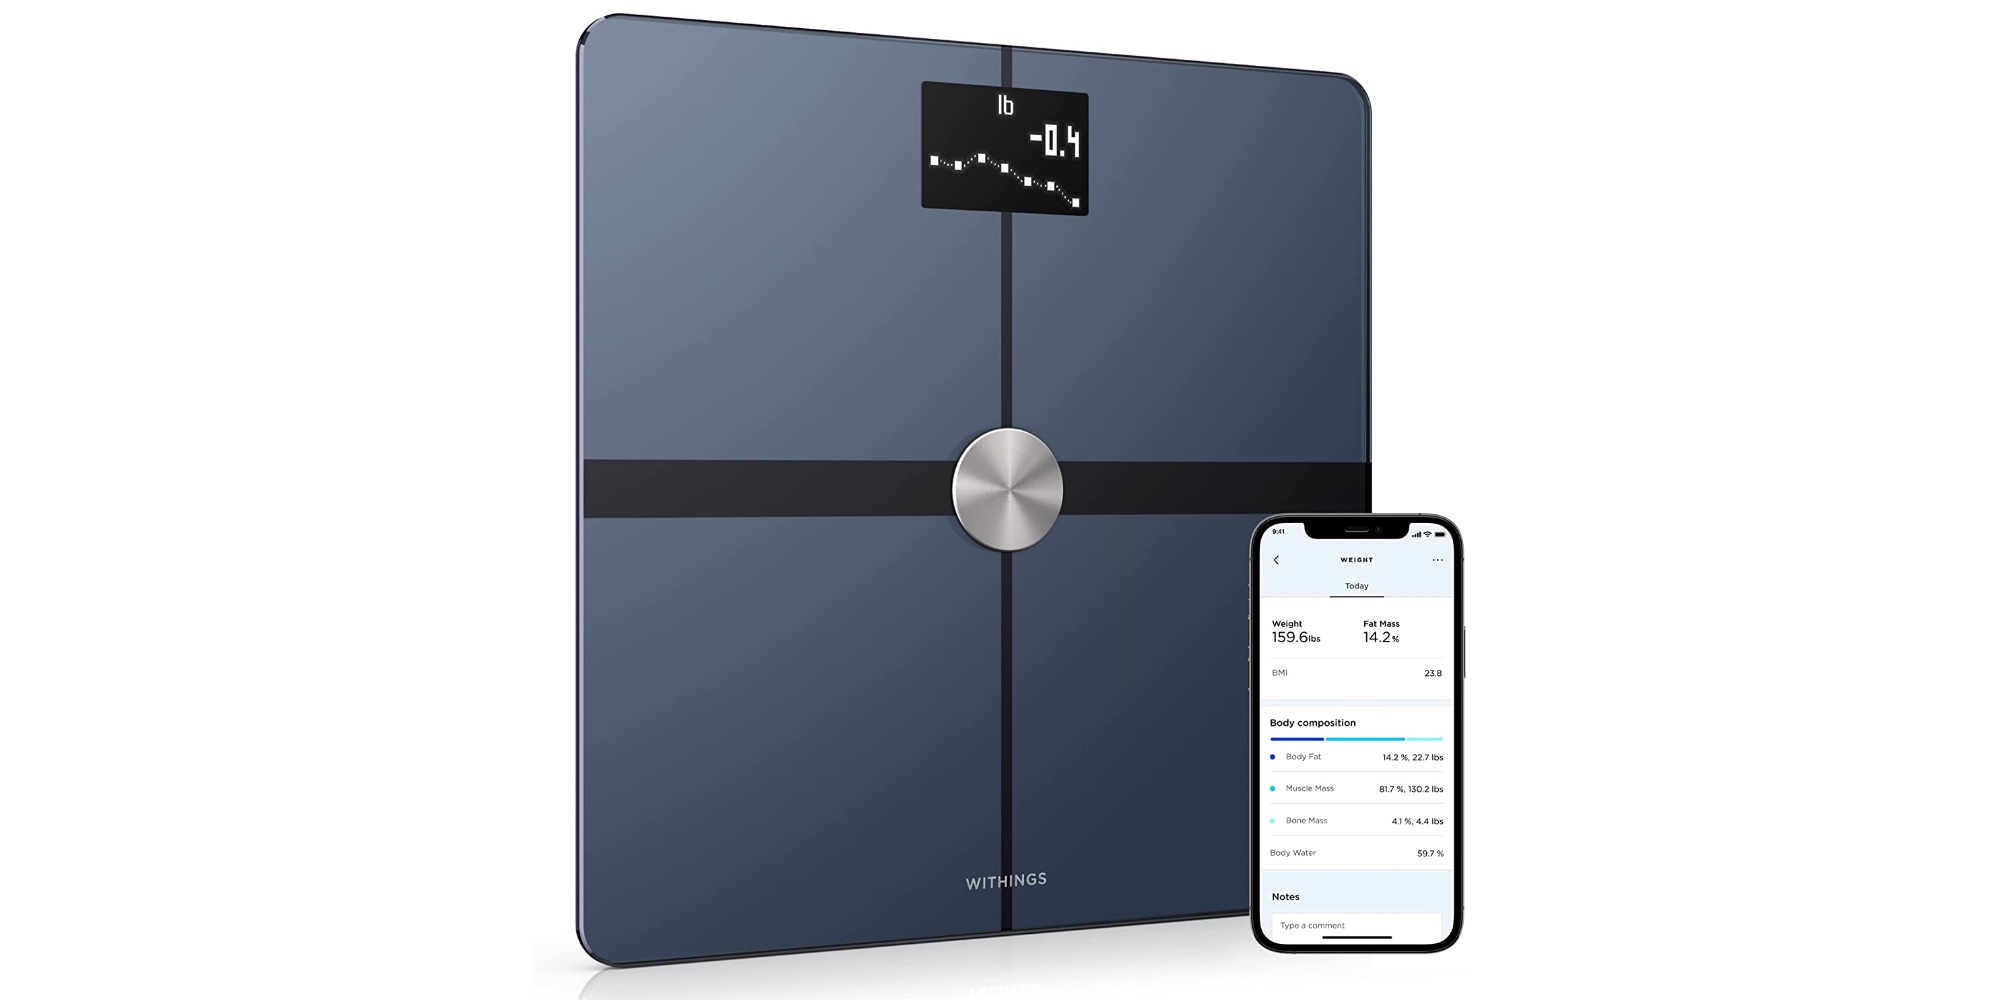 Withings Body+ Smart Wi-Fi Bathroom Scale syncs with Apple Health at $70  (Save 30%)